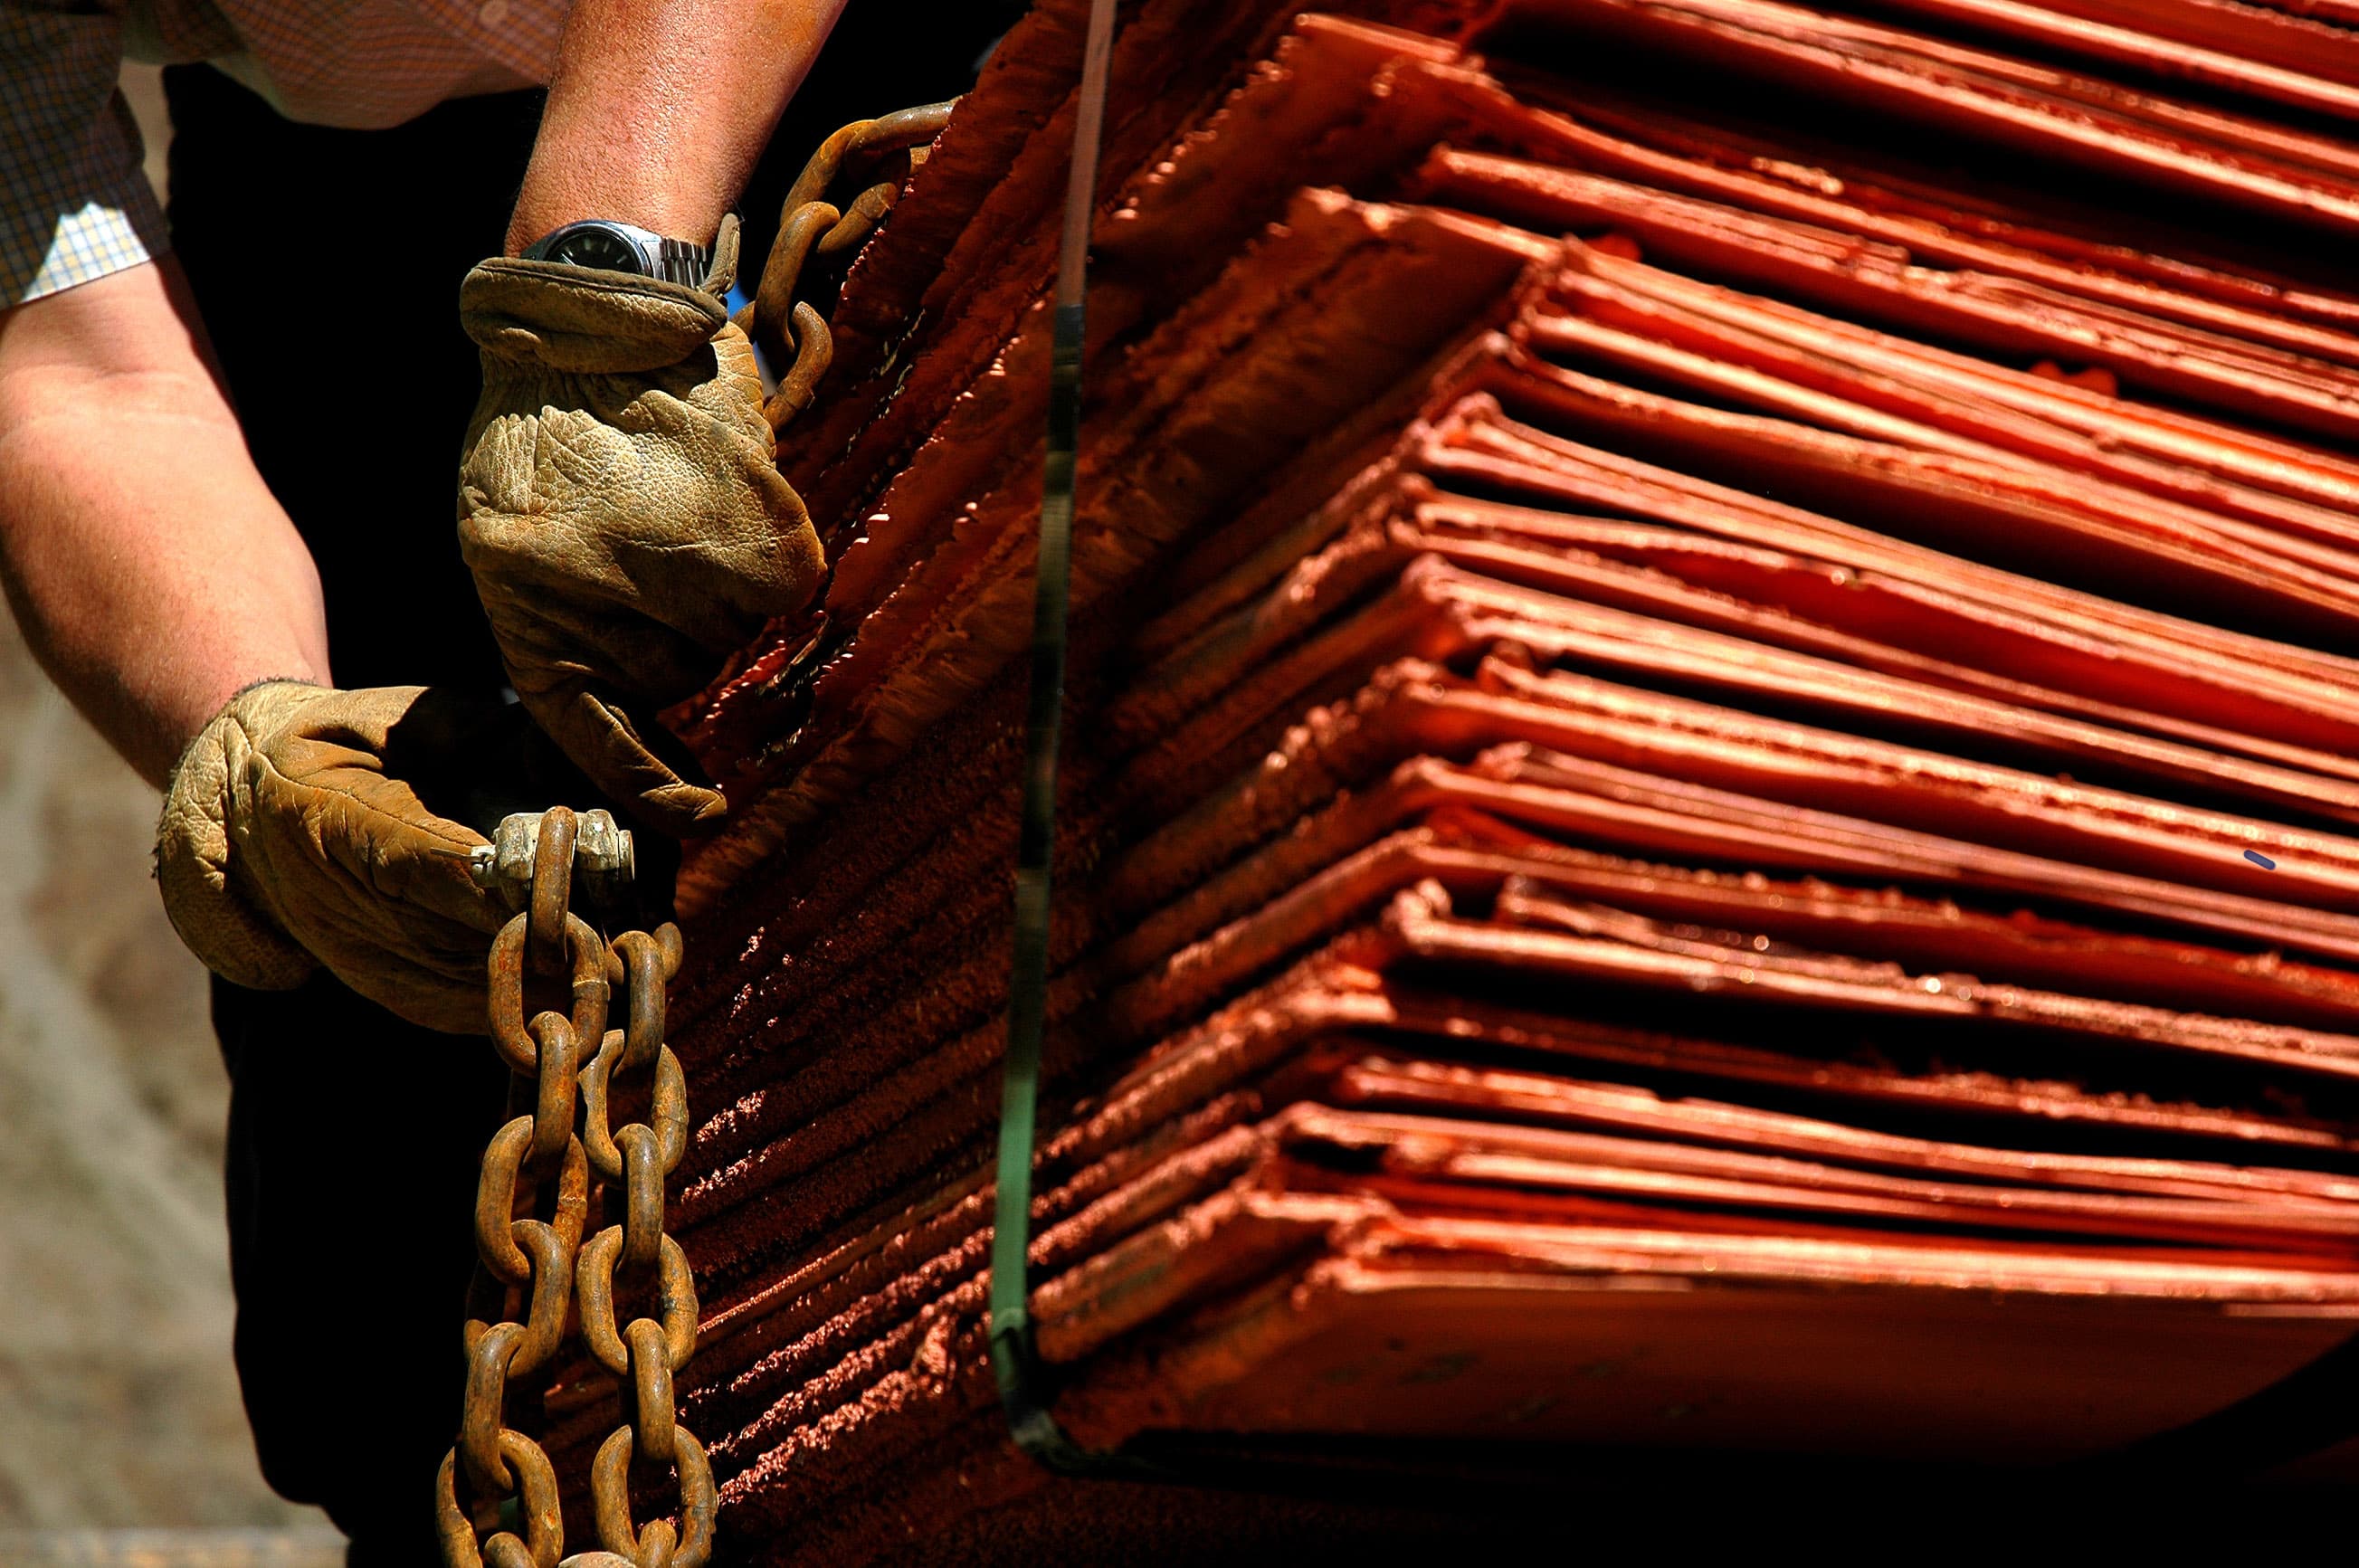 Goldman Sachs and others expect copper prices to soar. Here are some related stocks that analysts love